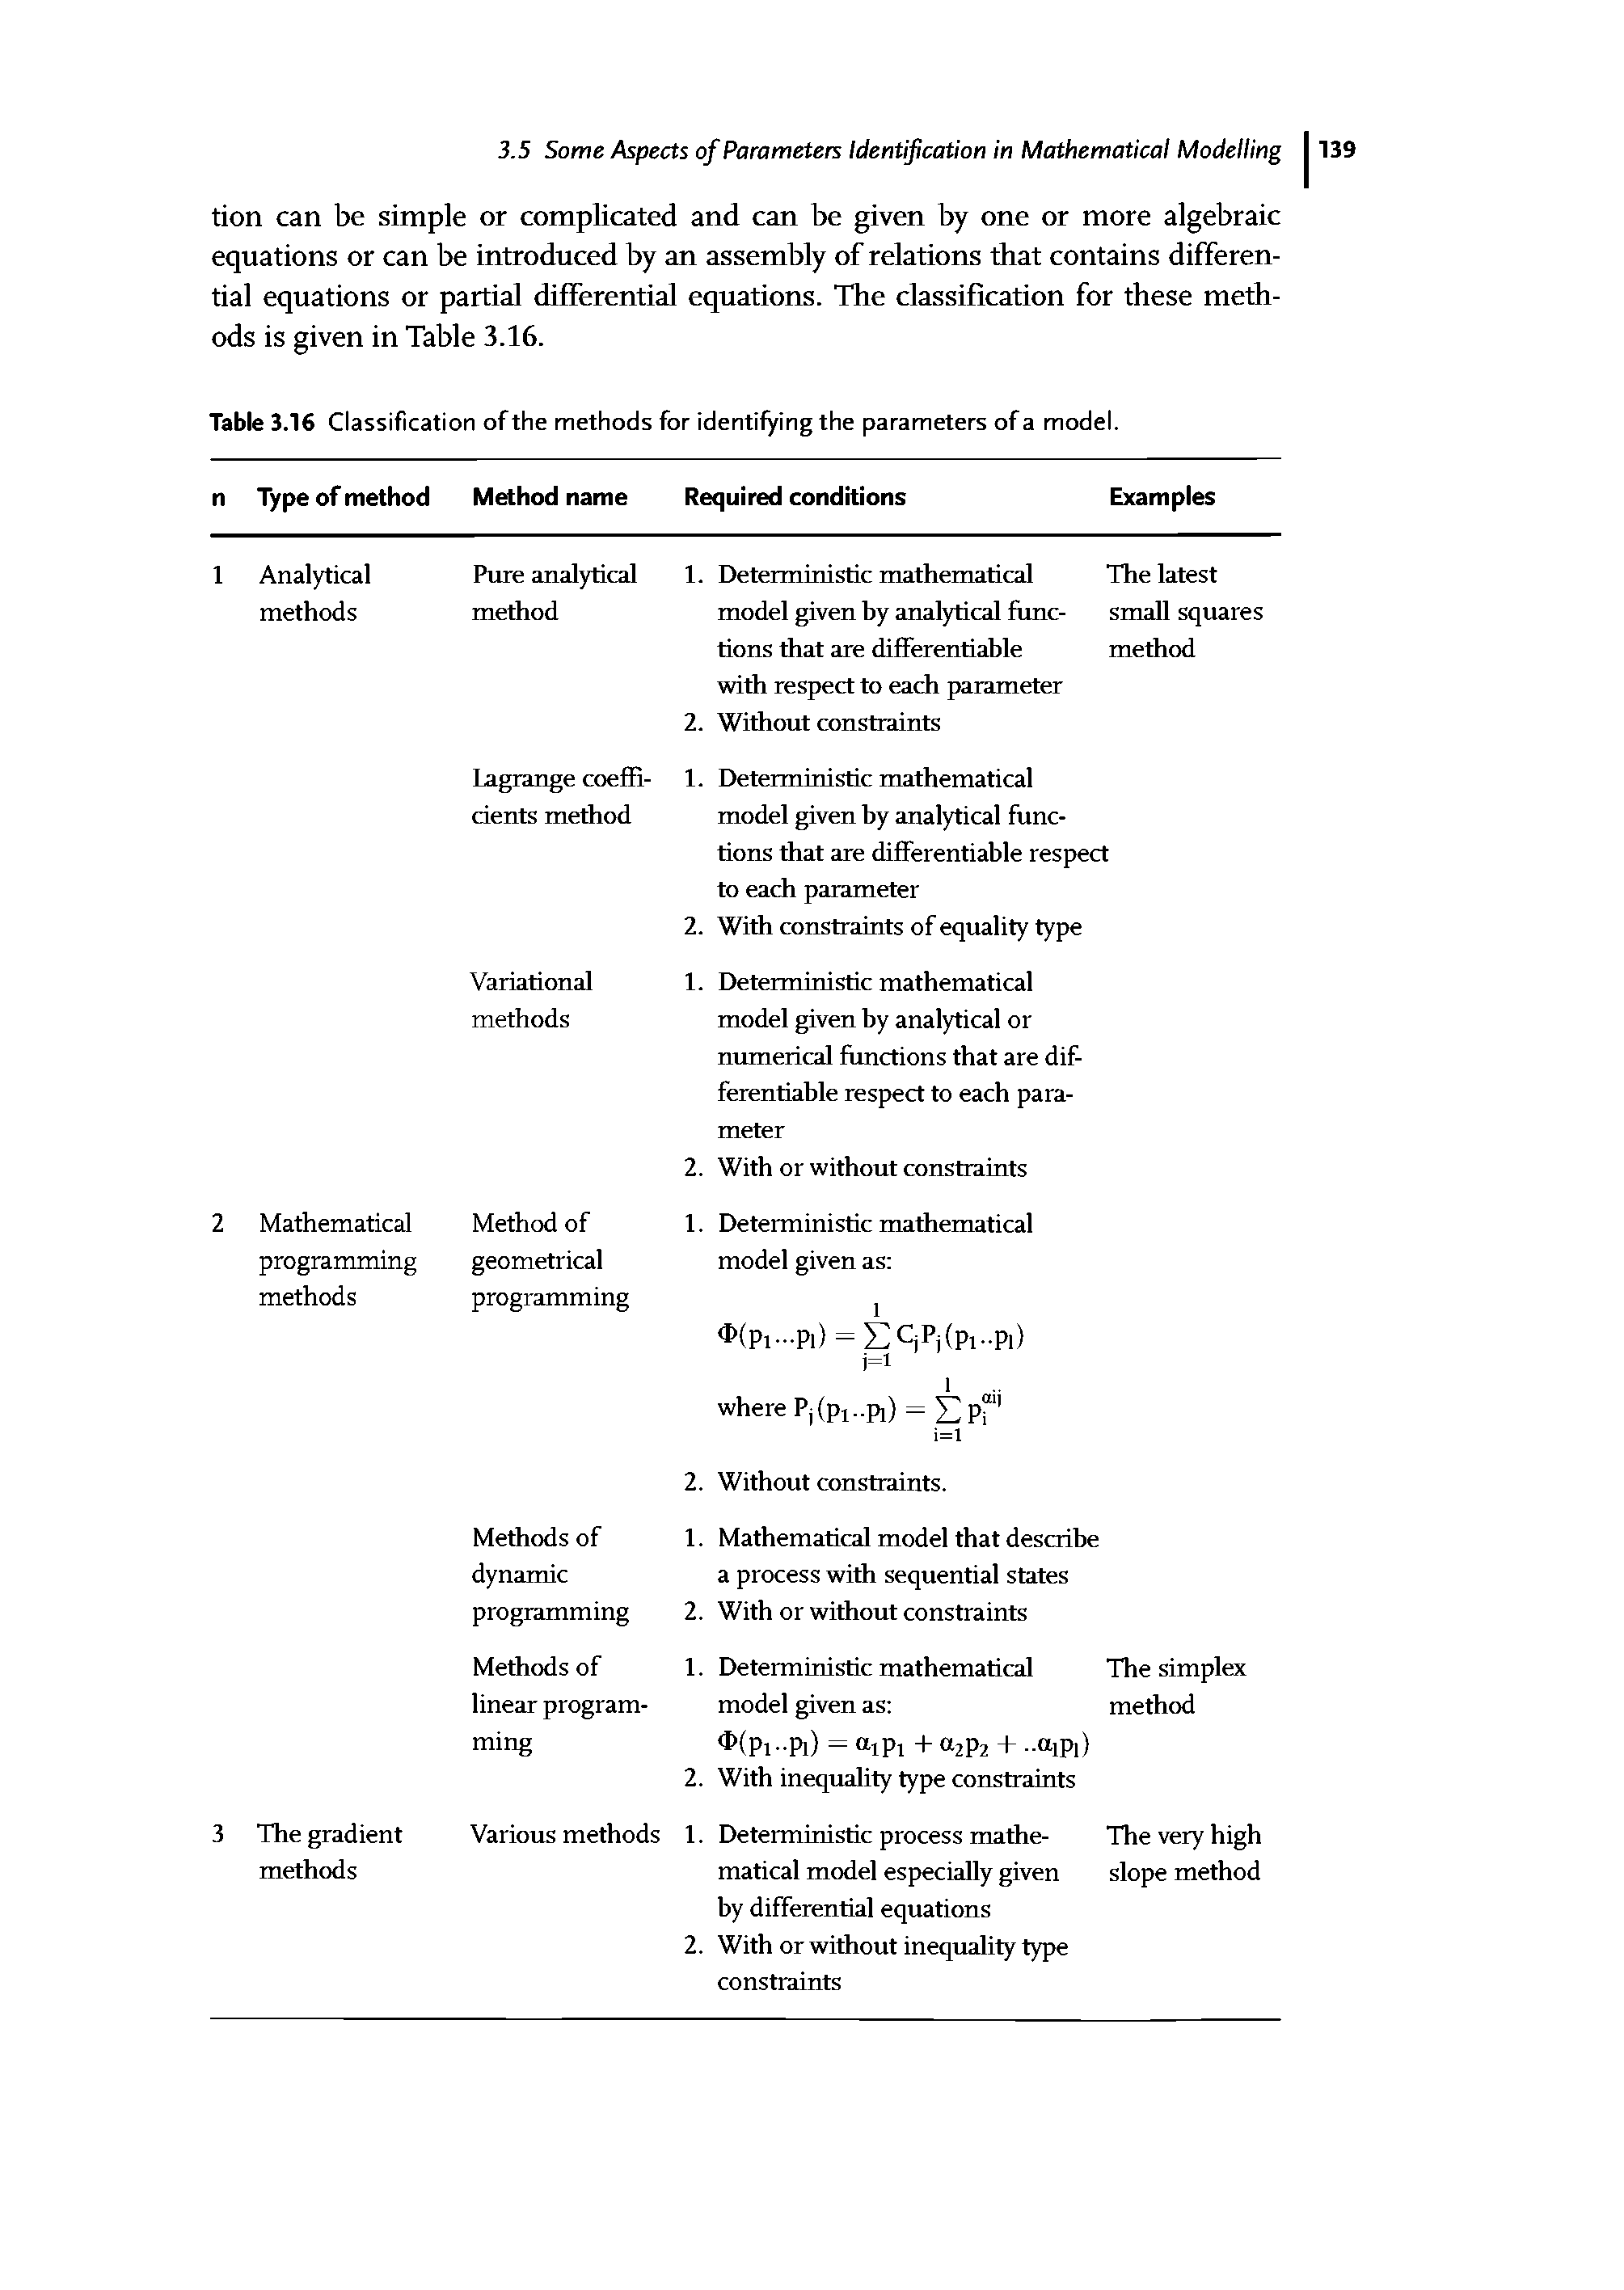 Table 3.16 Classification of the methods for identifying the parameters of a model.